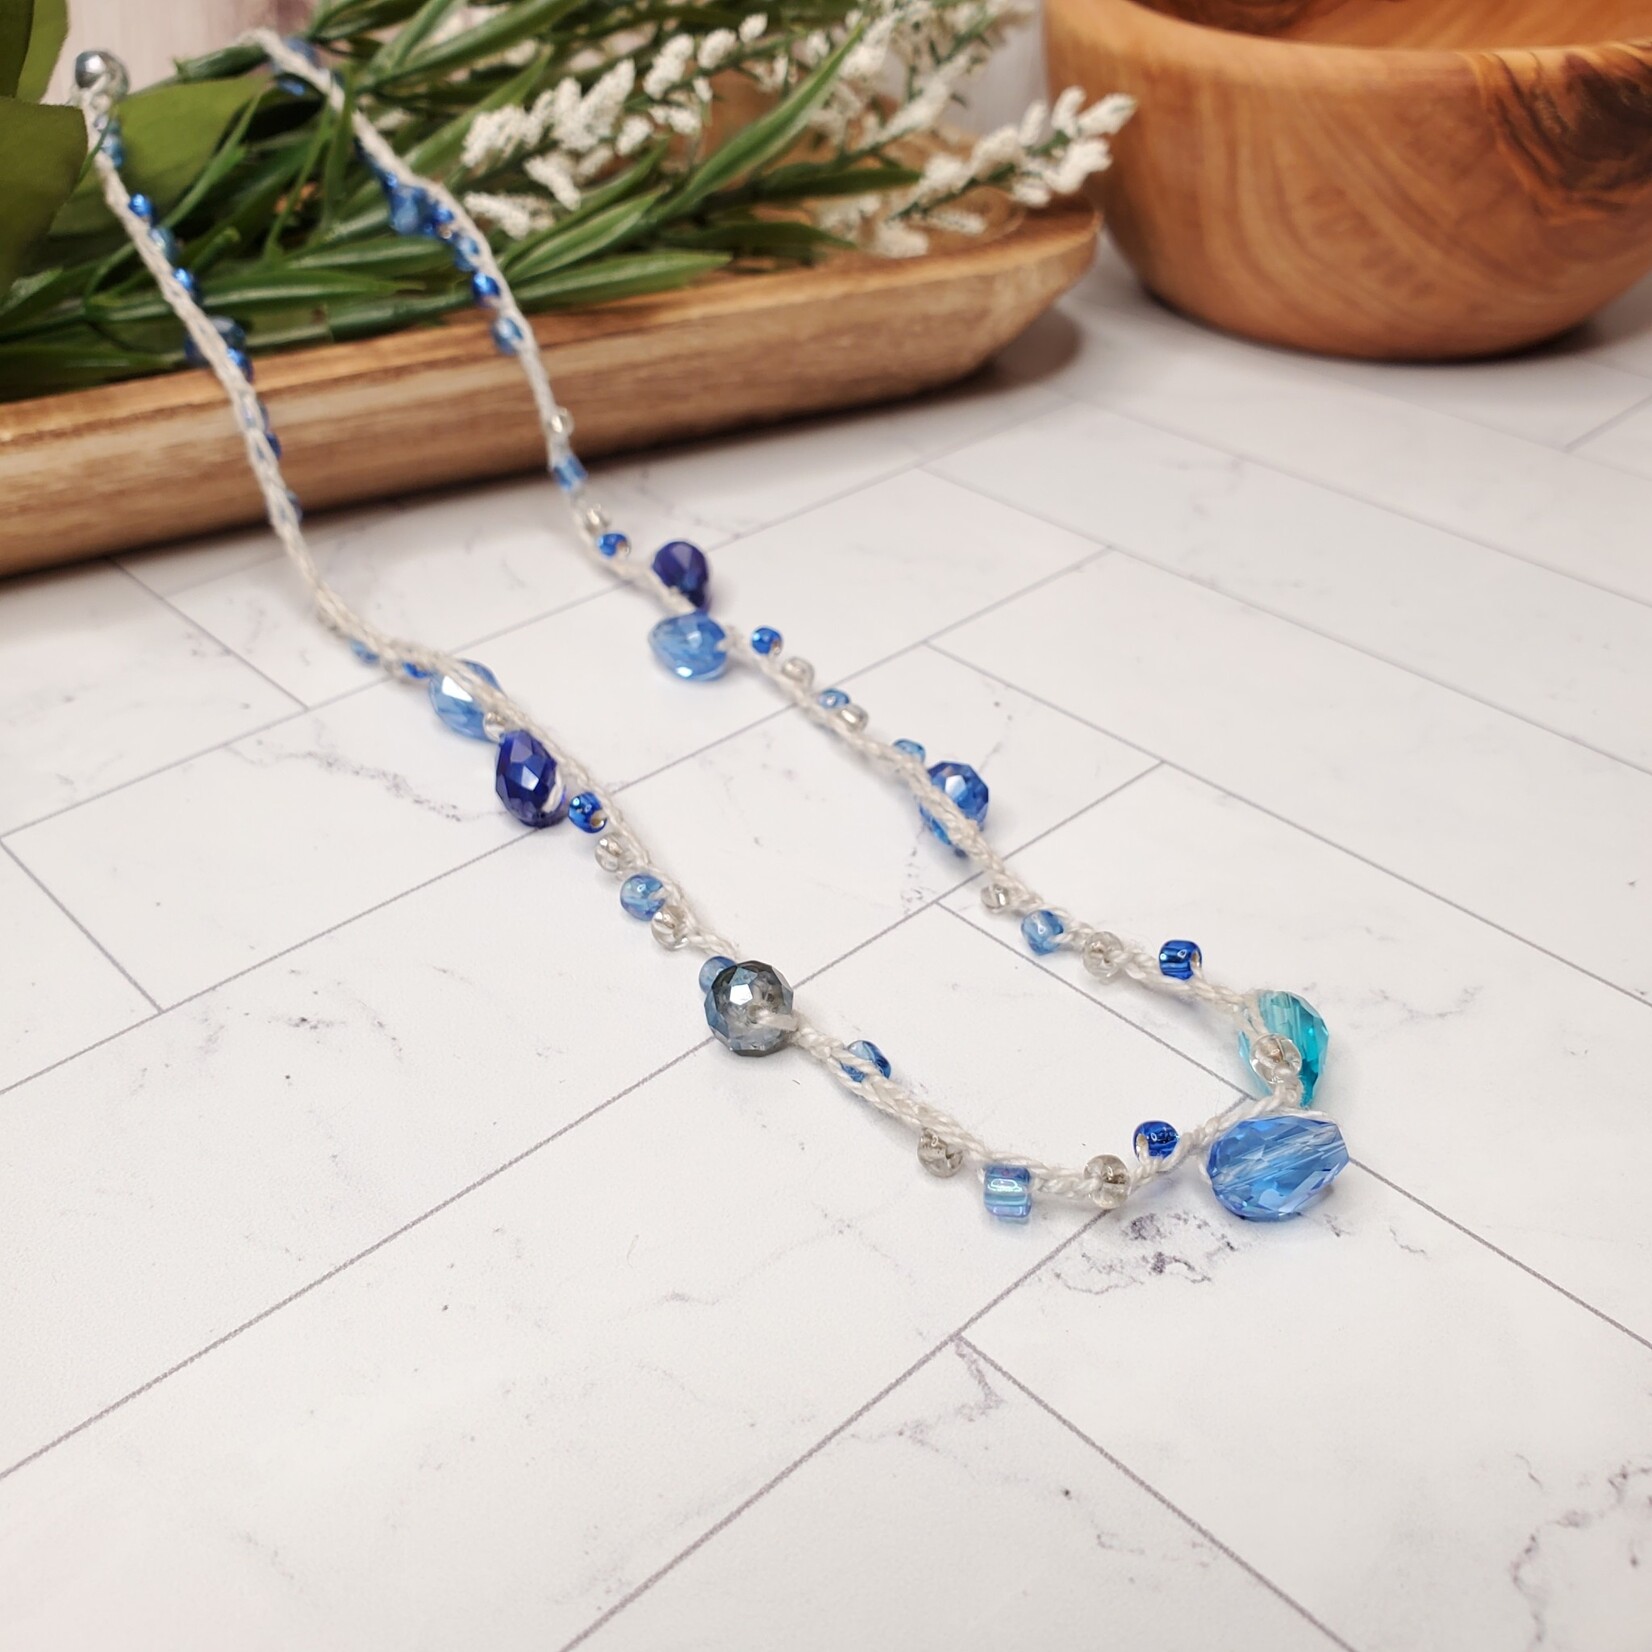 Bead Crochet Necklace Fun to Repeat - Mary Ellen Beads